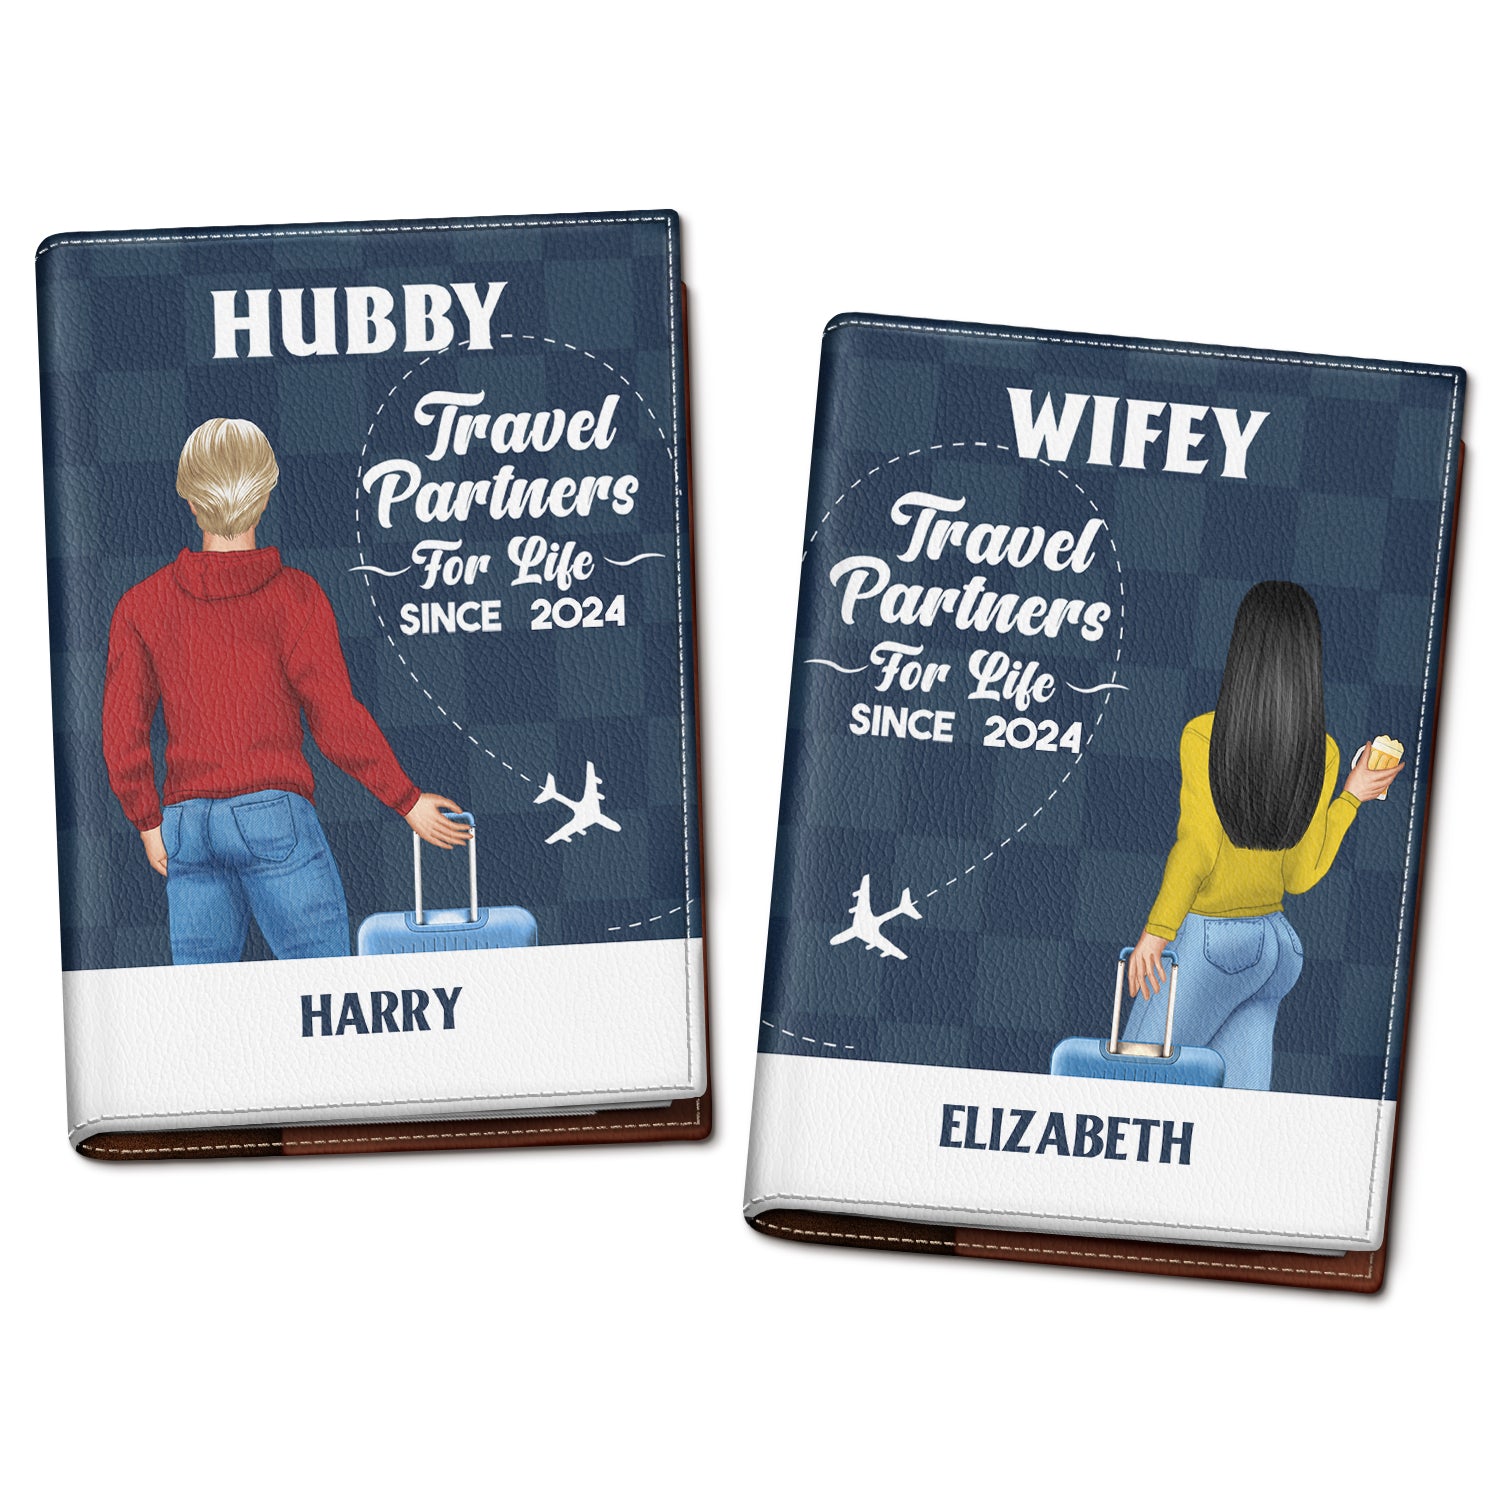 Traveling Couple Hubby & Wifey Travel Partners For Life Pattern - Gift For Couples, Traveling Gift - Personalized Passport Cover, Passport Holder